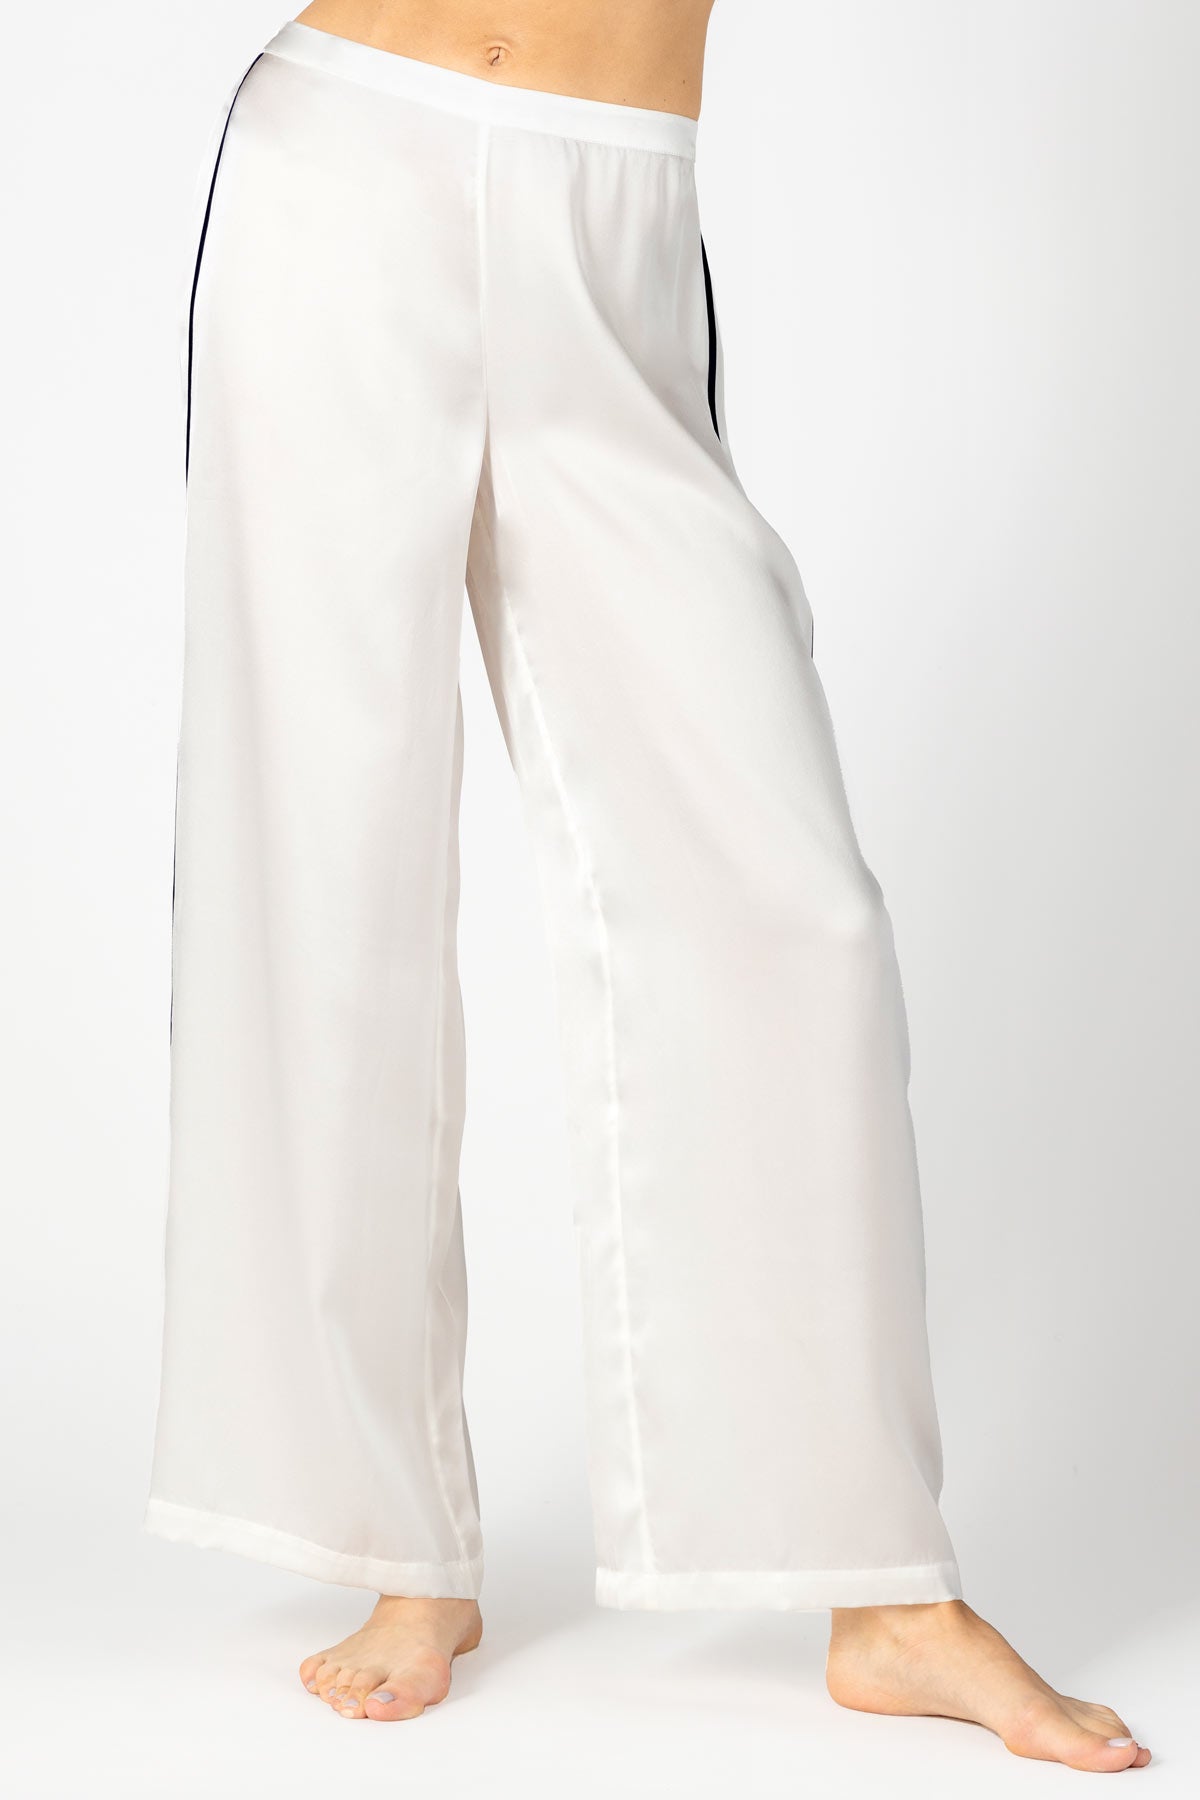 Buy SECRET DESIRE SDR Womens Wide Leg Pants Straight Leg High Waisted  Office Loose Long Pants M White at Amazon.in